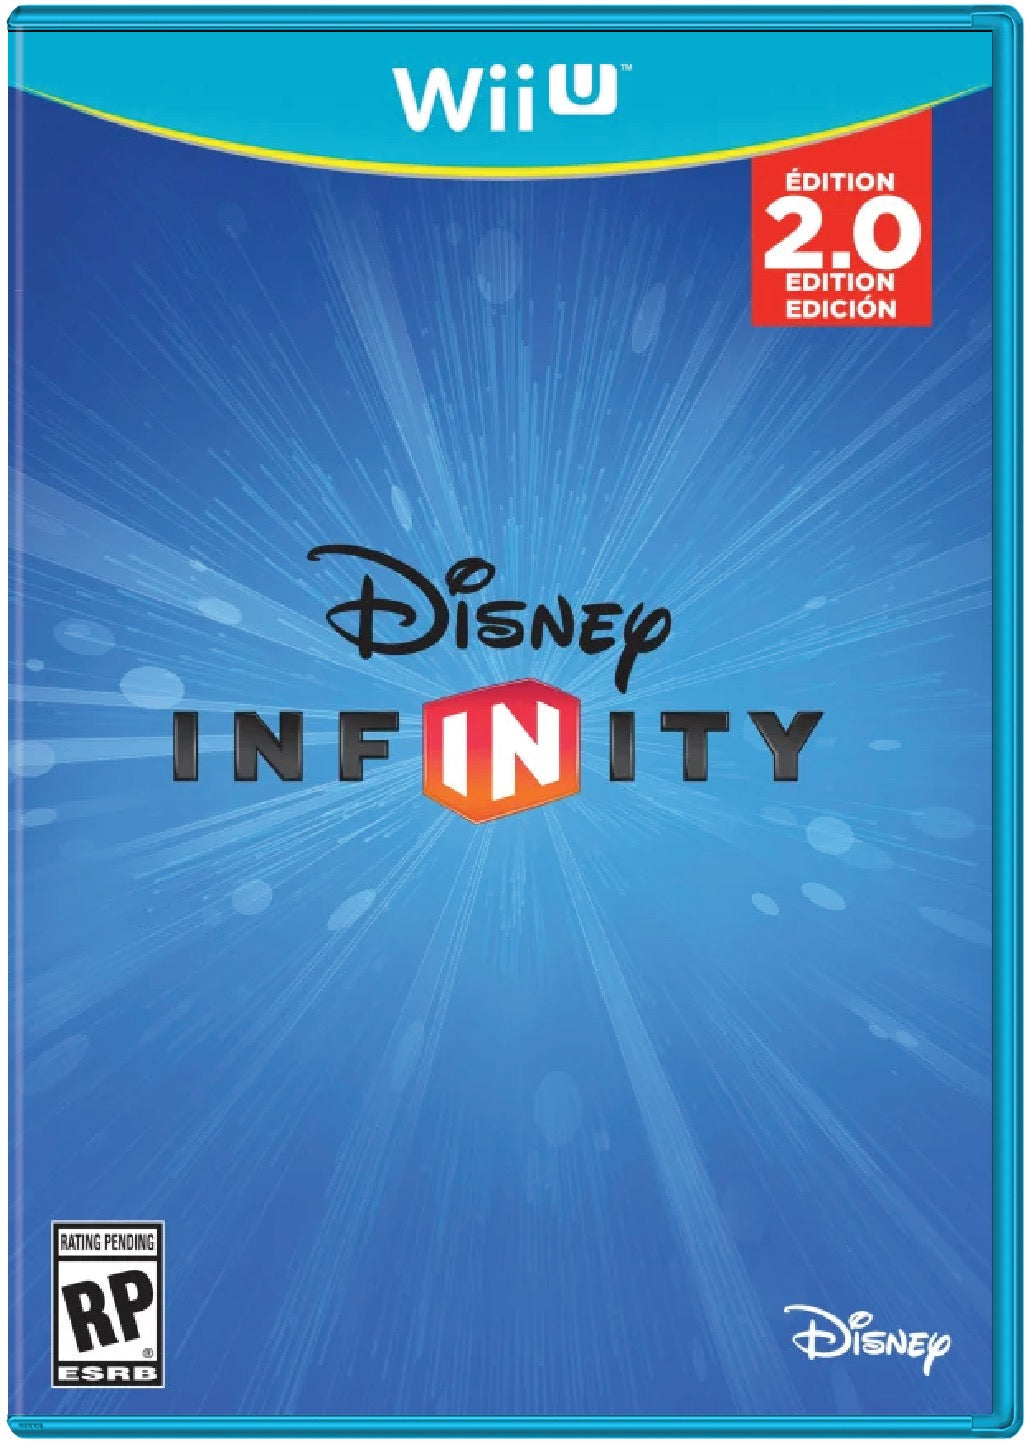 Disney Infinity 2.0 Edition Cover Art and Product Photo